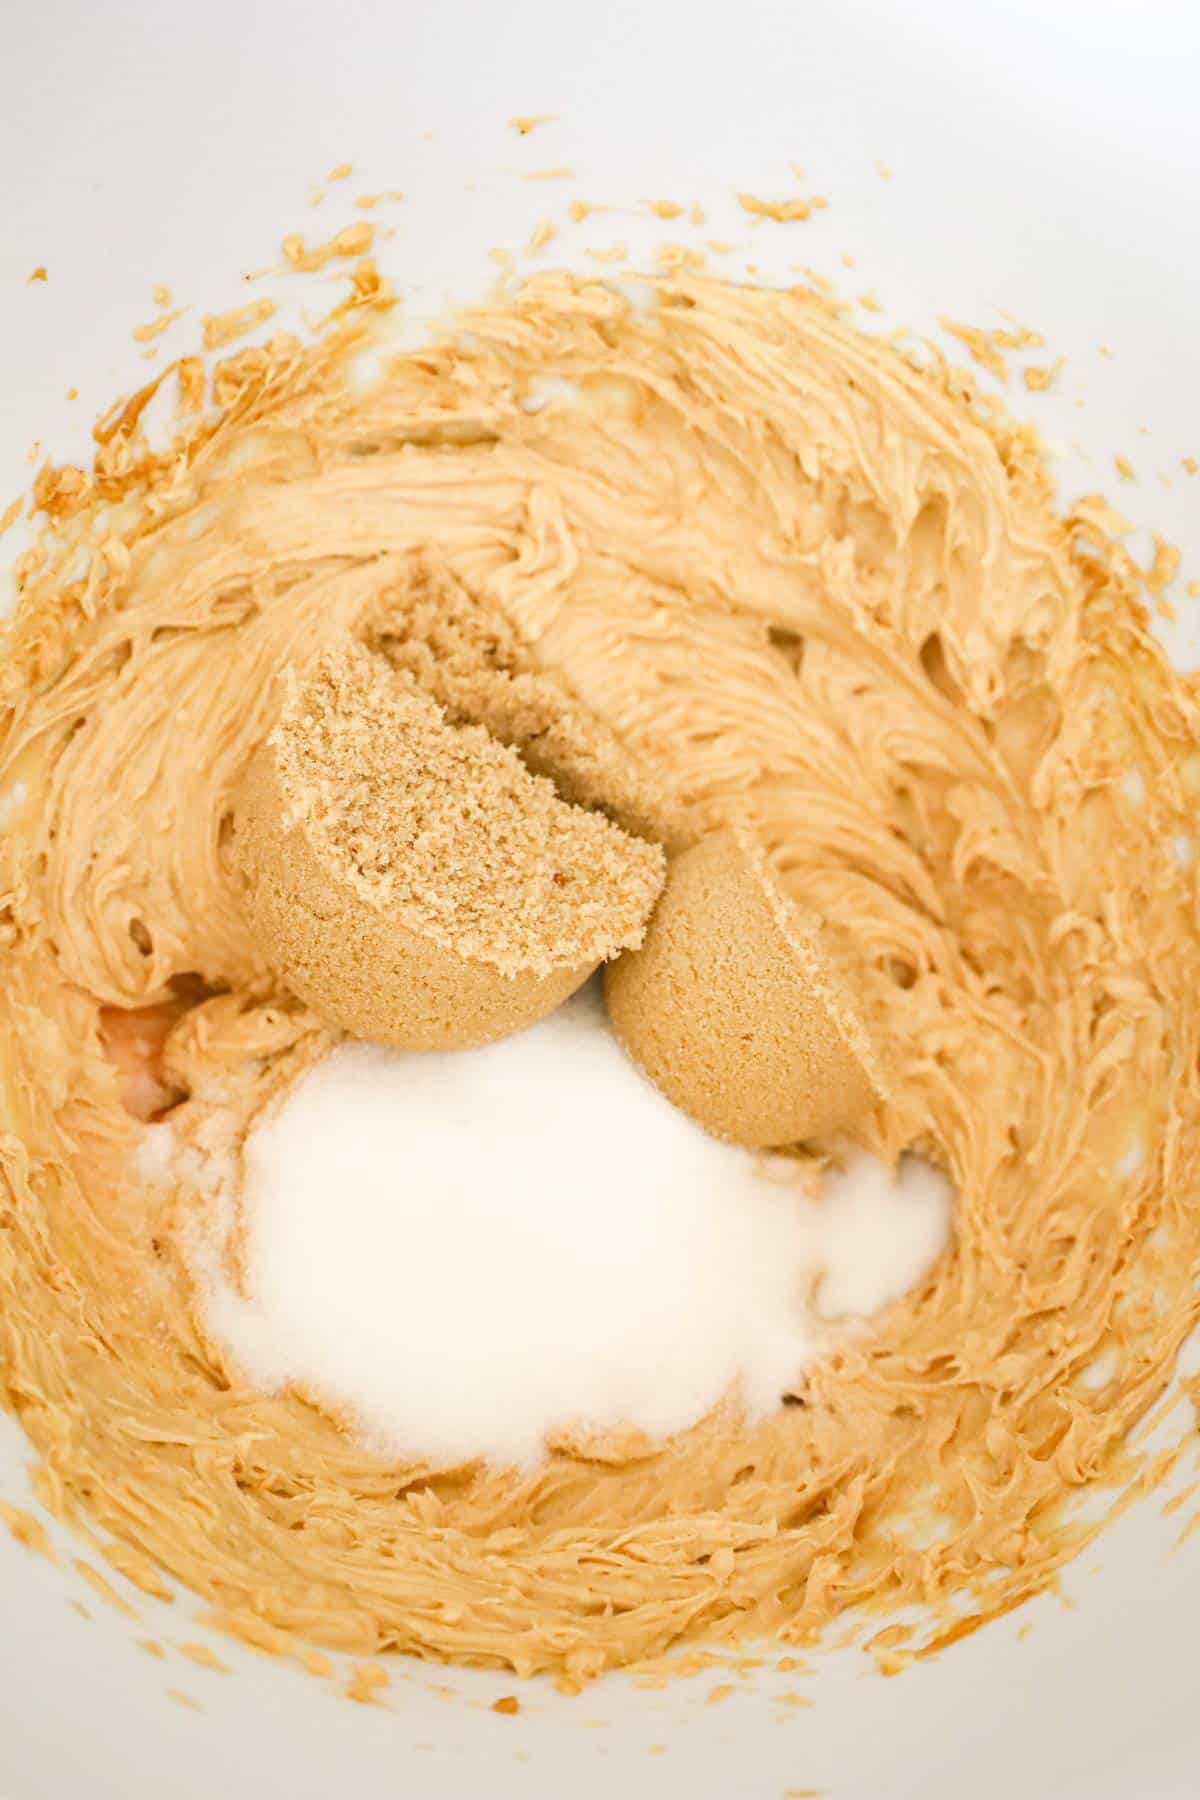 brown sugar and white sugar on top of creamy peanut butter mixture in a mixing bowl